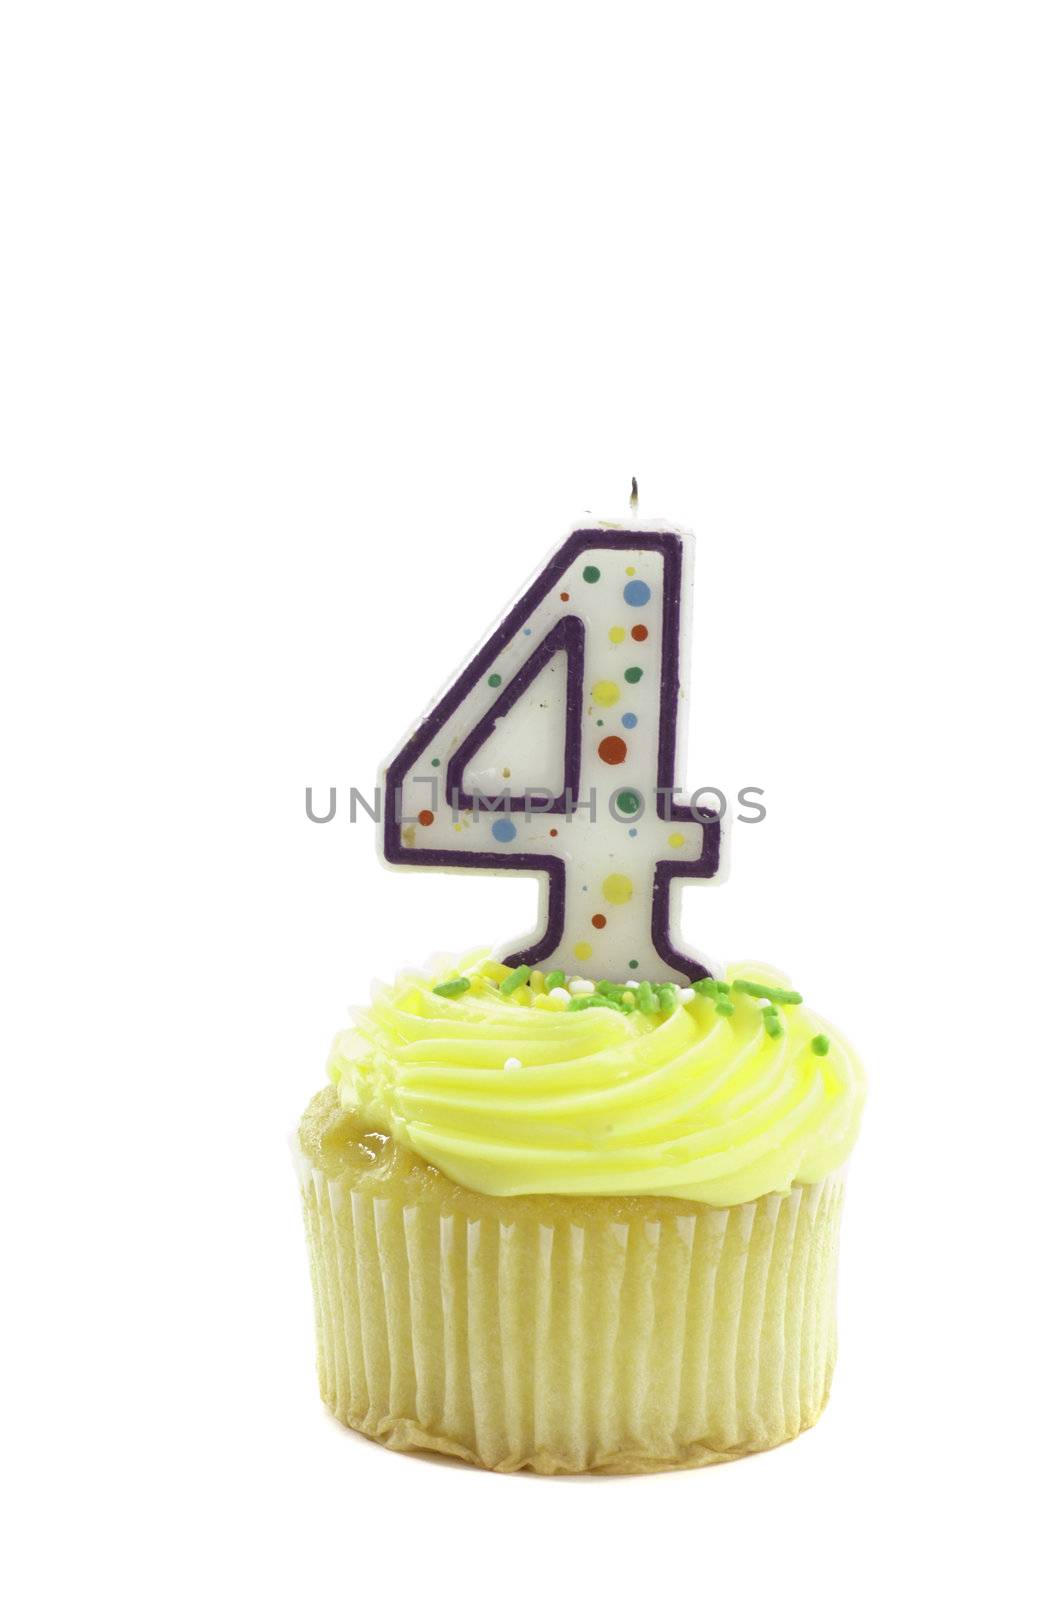 cupcake, isolated on white with a decorative candle in the shape of a number four